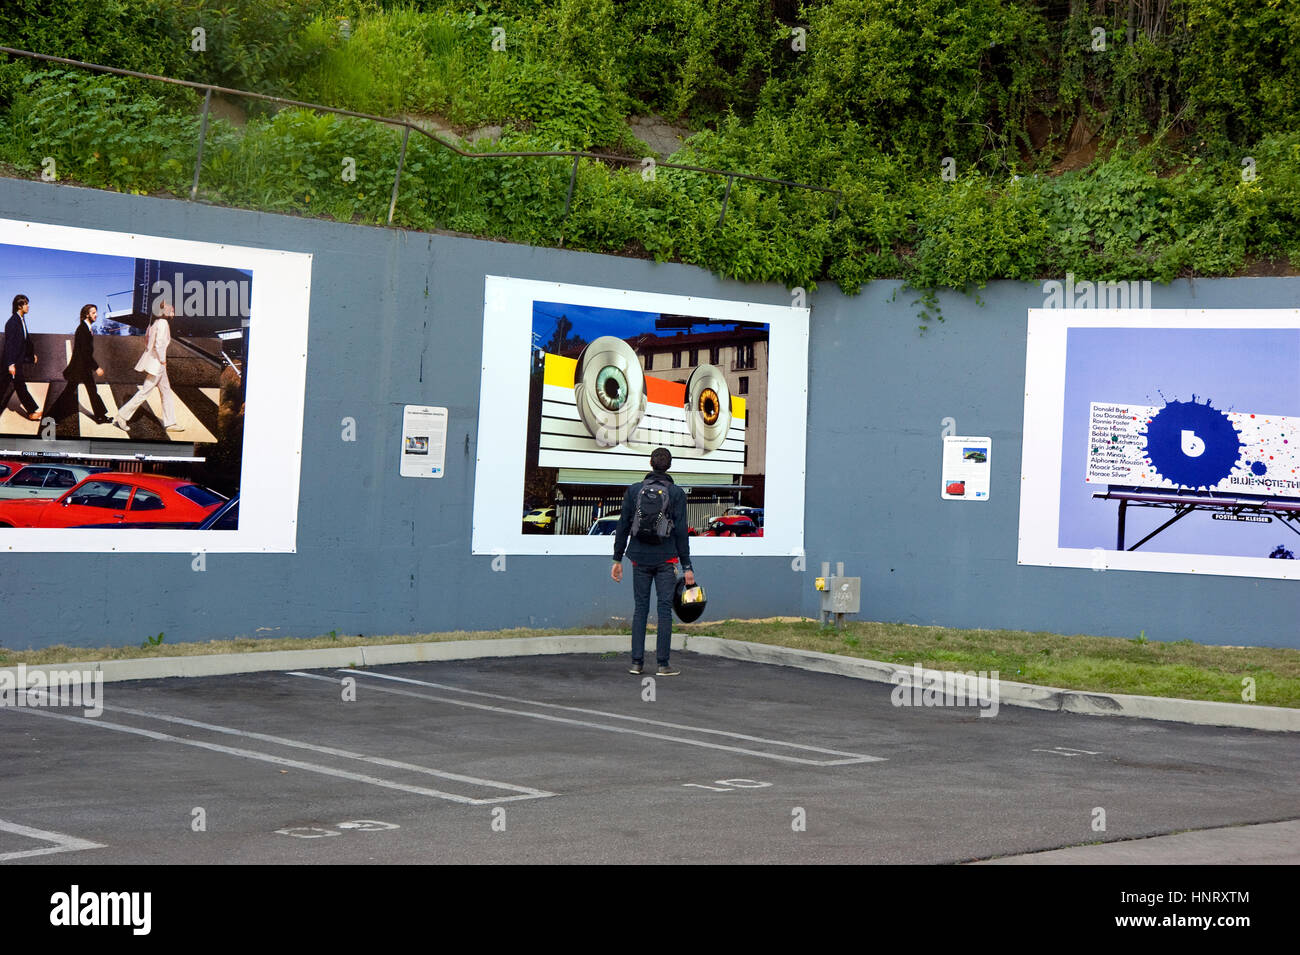 Los Angeles, USA. 14th February 2017. New installation of outdoor art exhibit at the West Hollywood parking lot on the Sunset Strip in Los Angeles featuring Robert Landau's photos documenting the classic hand-painted rock billboards from the 1960s and 70s. Credit: Robert Landau/Alamy Live News Stock Photo